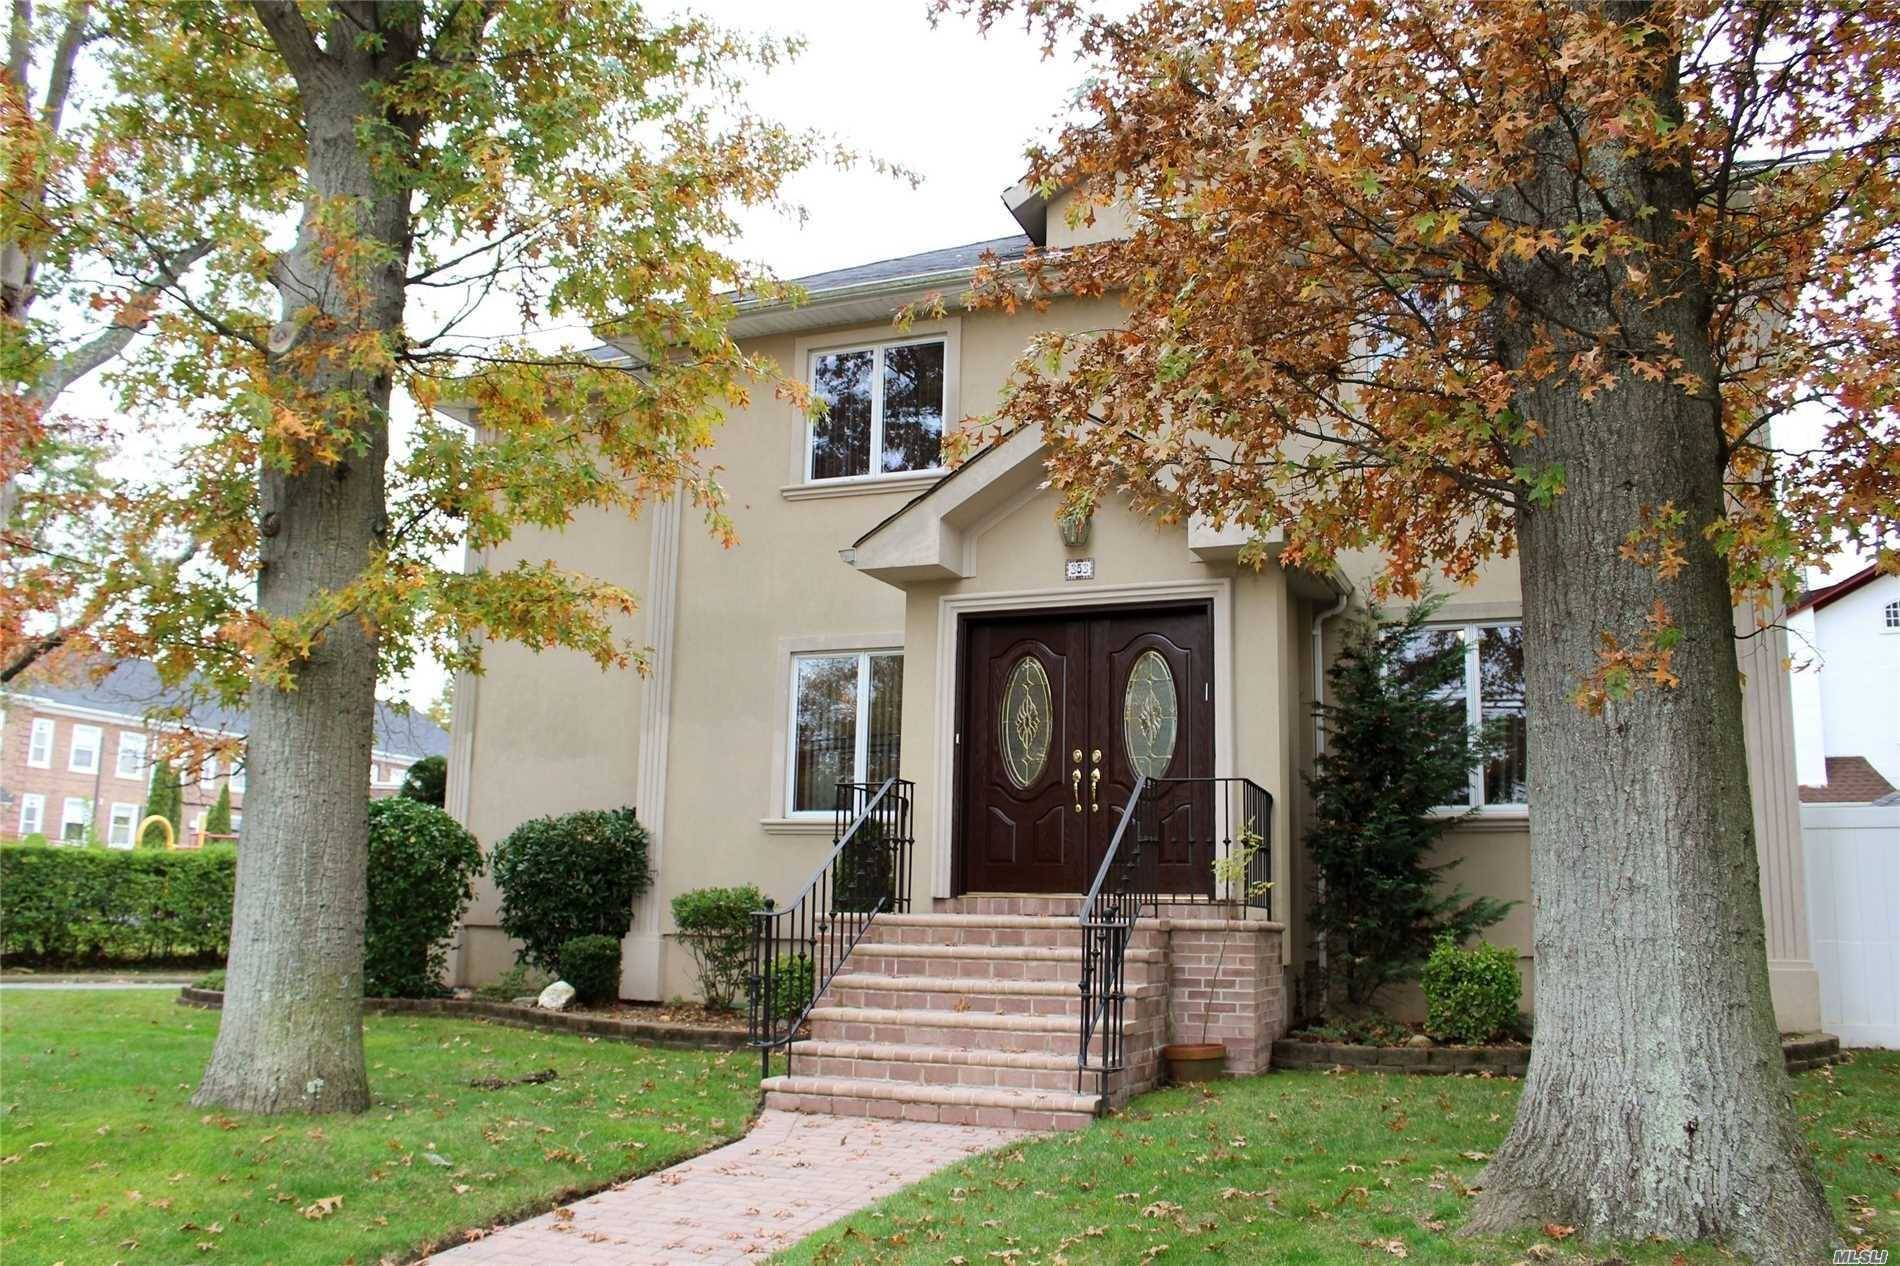 Beautifully renovated five bedroom colonial.